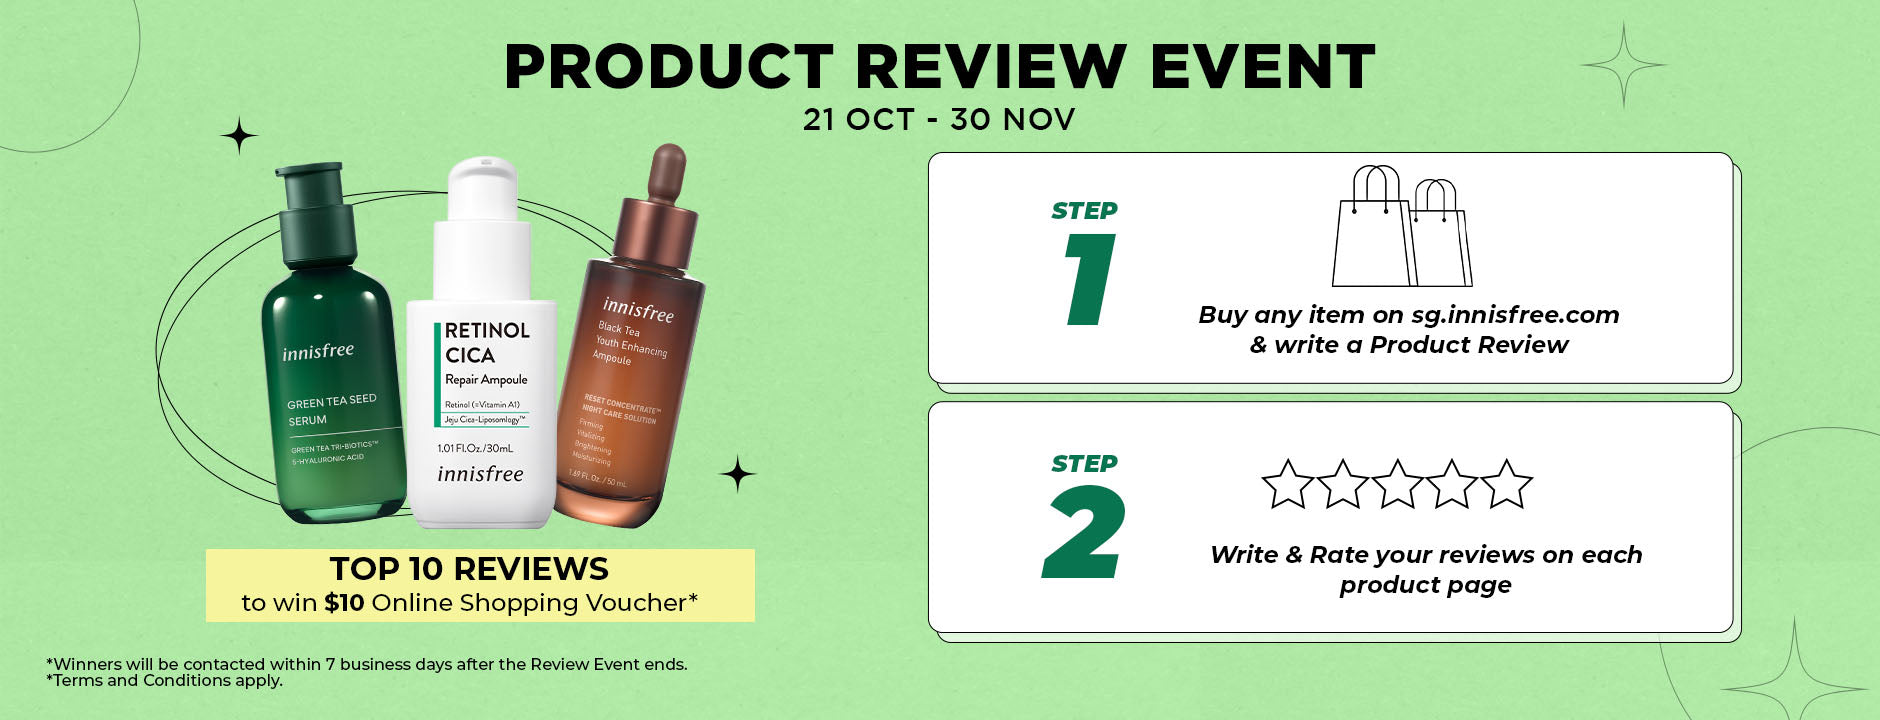 PRODUCTS REVIEW